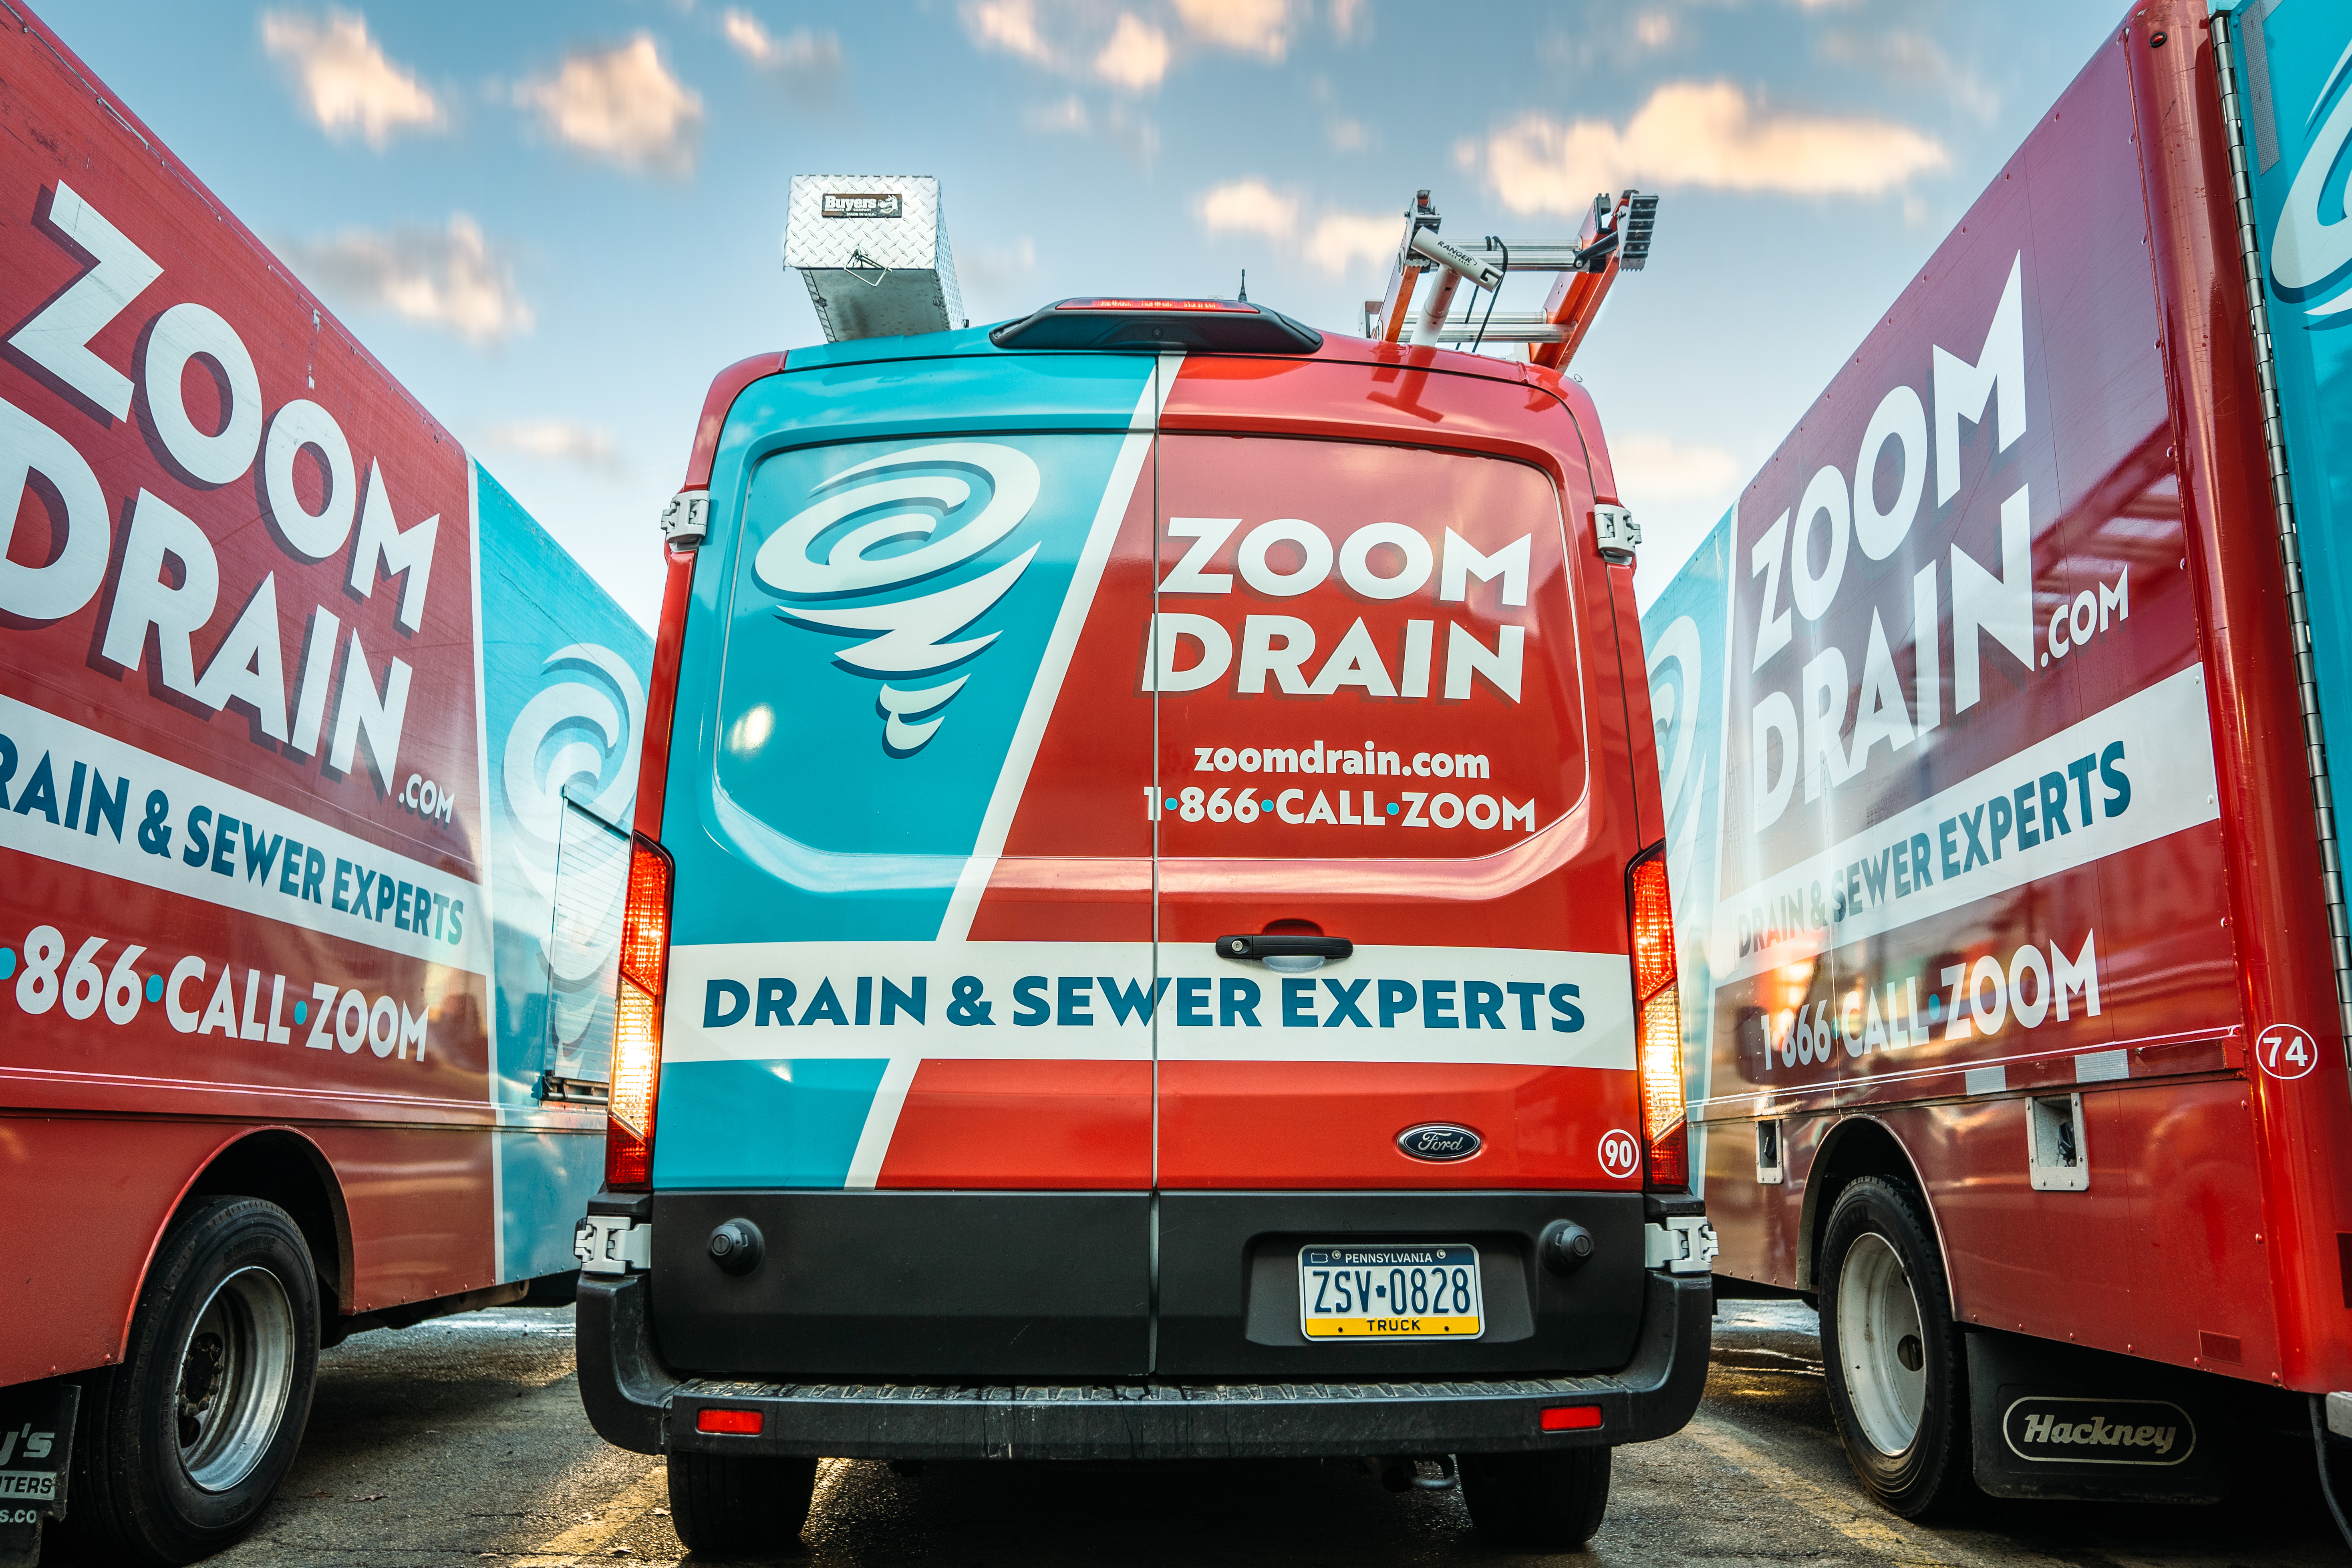 Now Open: Get To Know The Owners Of Zoom Drain Cincinnati